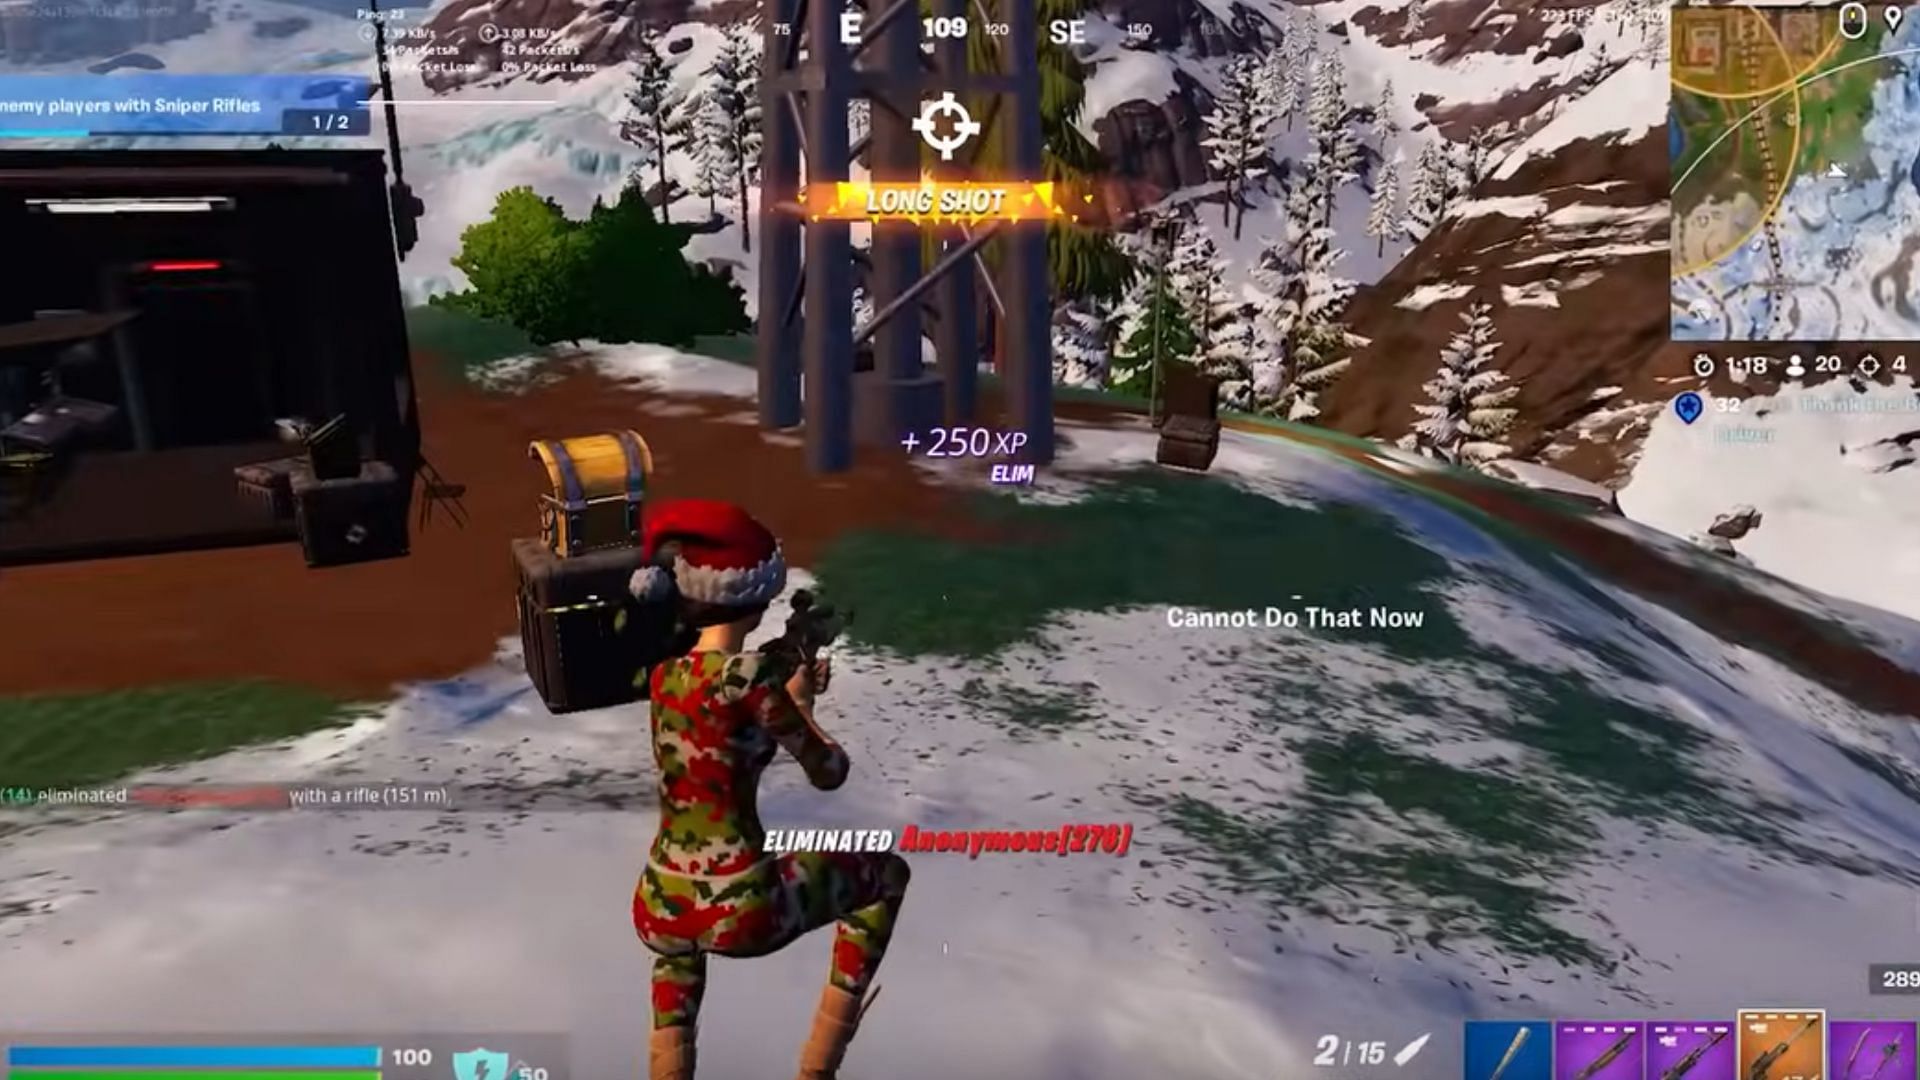 Fortnite player nearly eliminates opponent, but gets one-shot instead